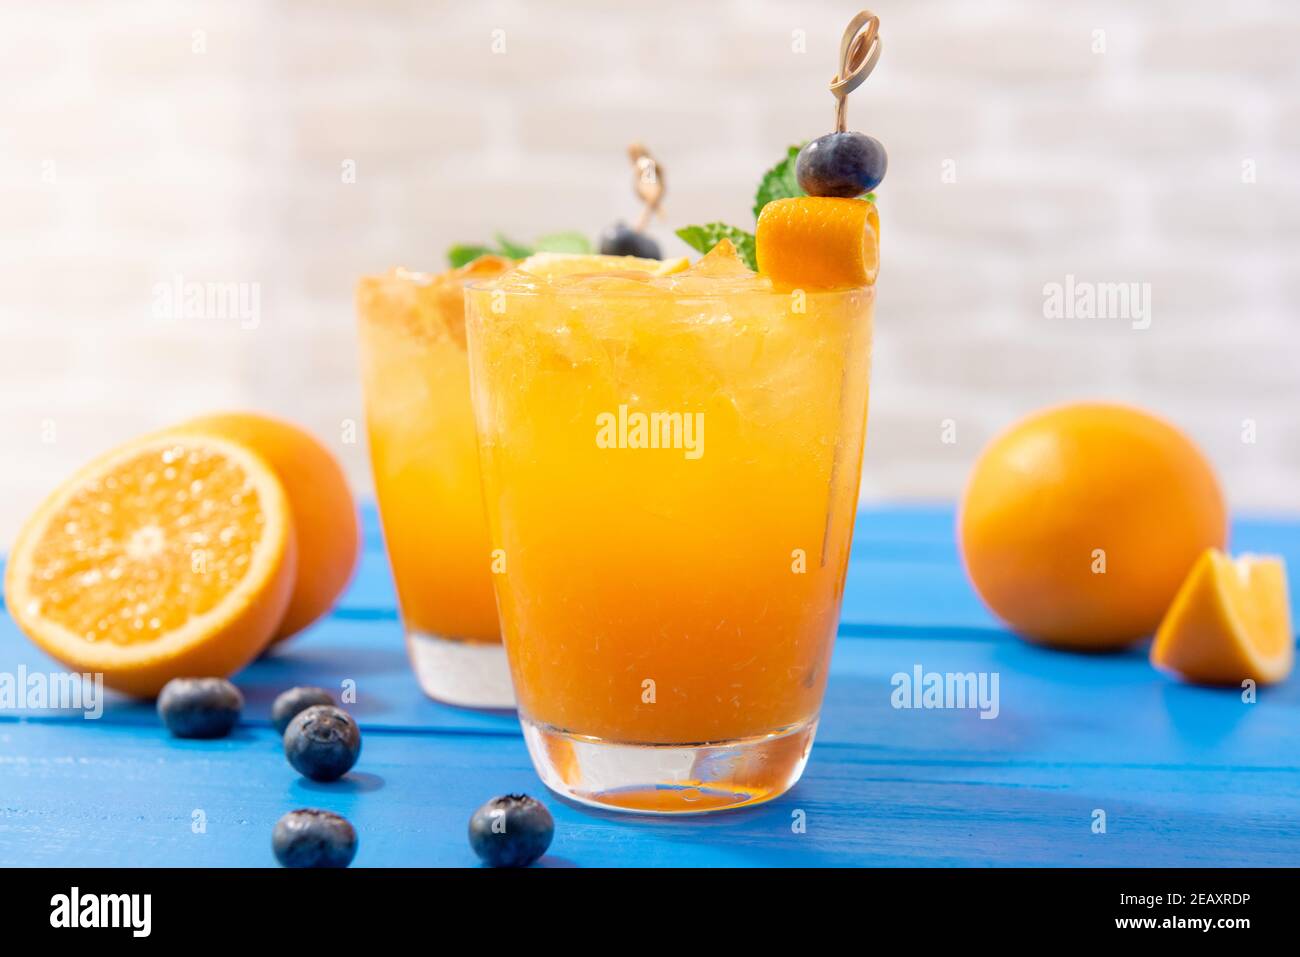 Colorful fresh fruit juice mocktail drinks with oranges and blueberries on blue table background Stock Photo